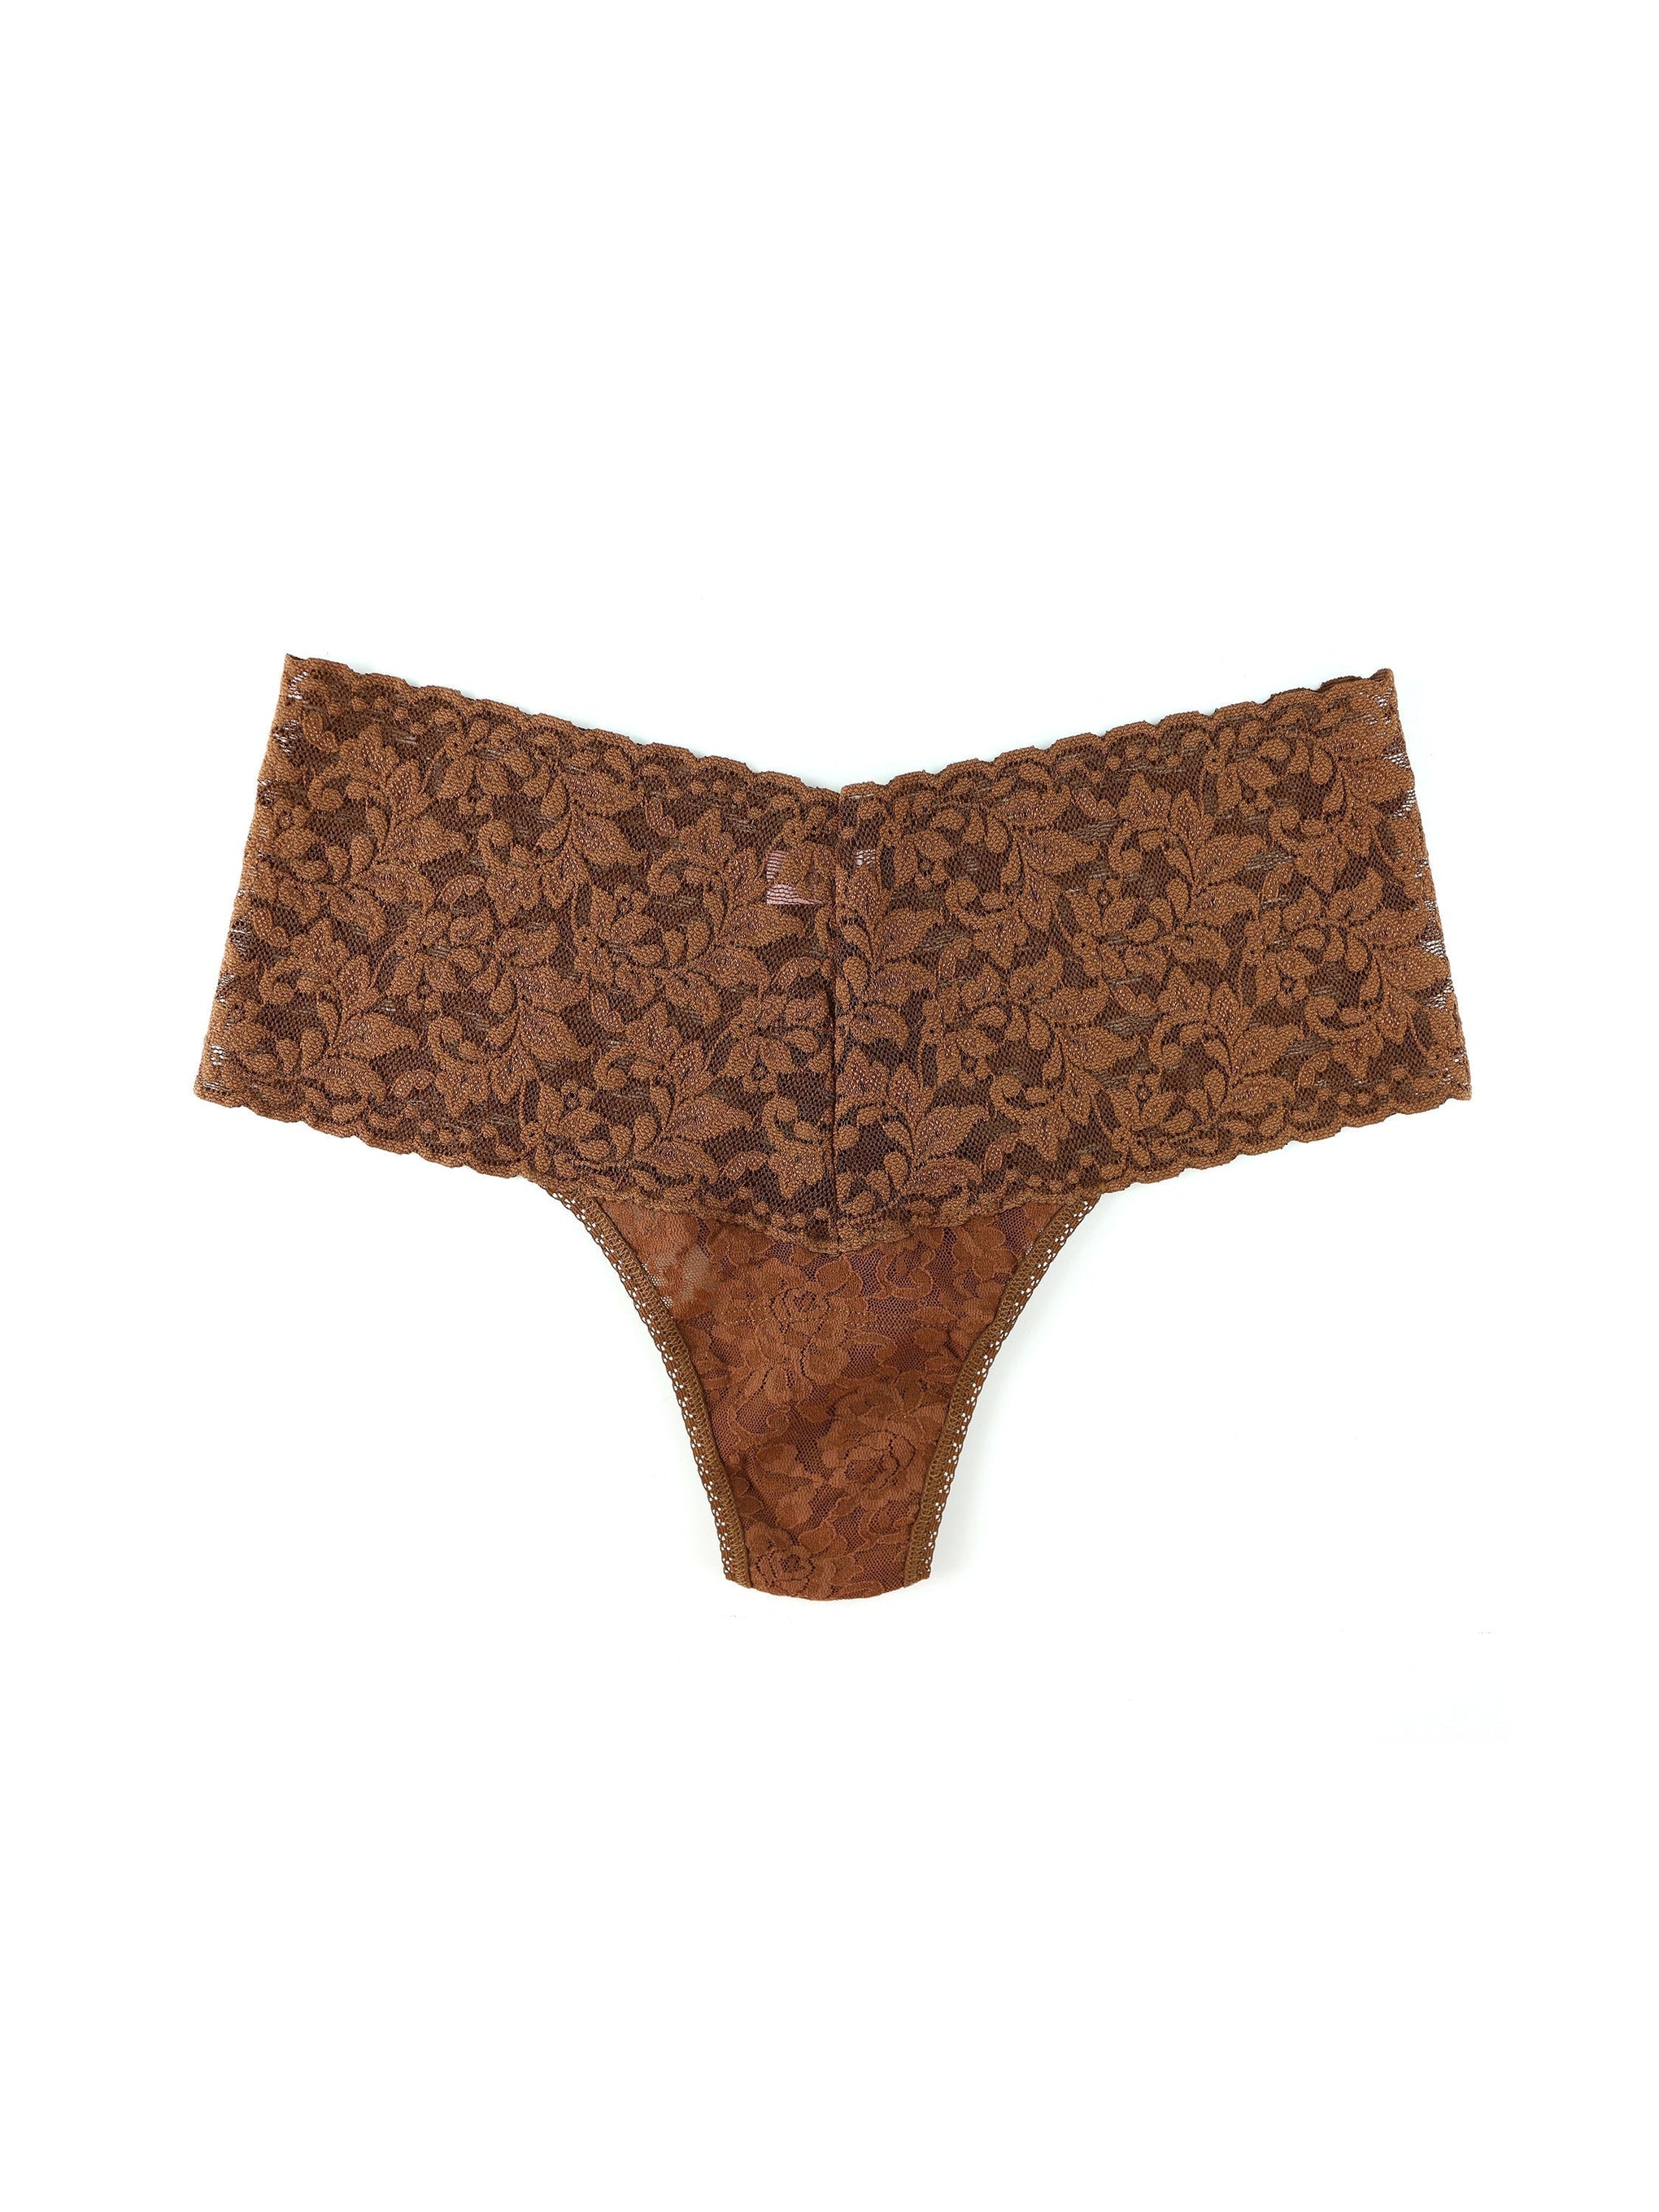 French Cami Knickers From Nylon Dreams